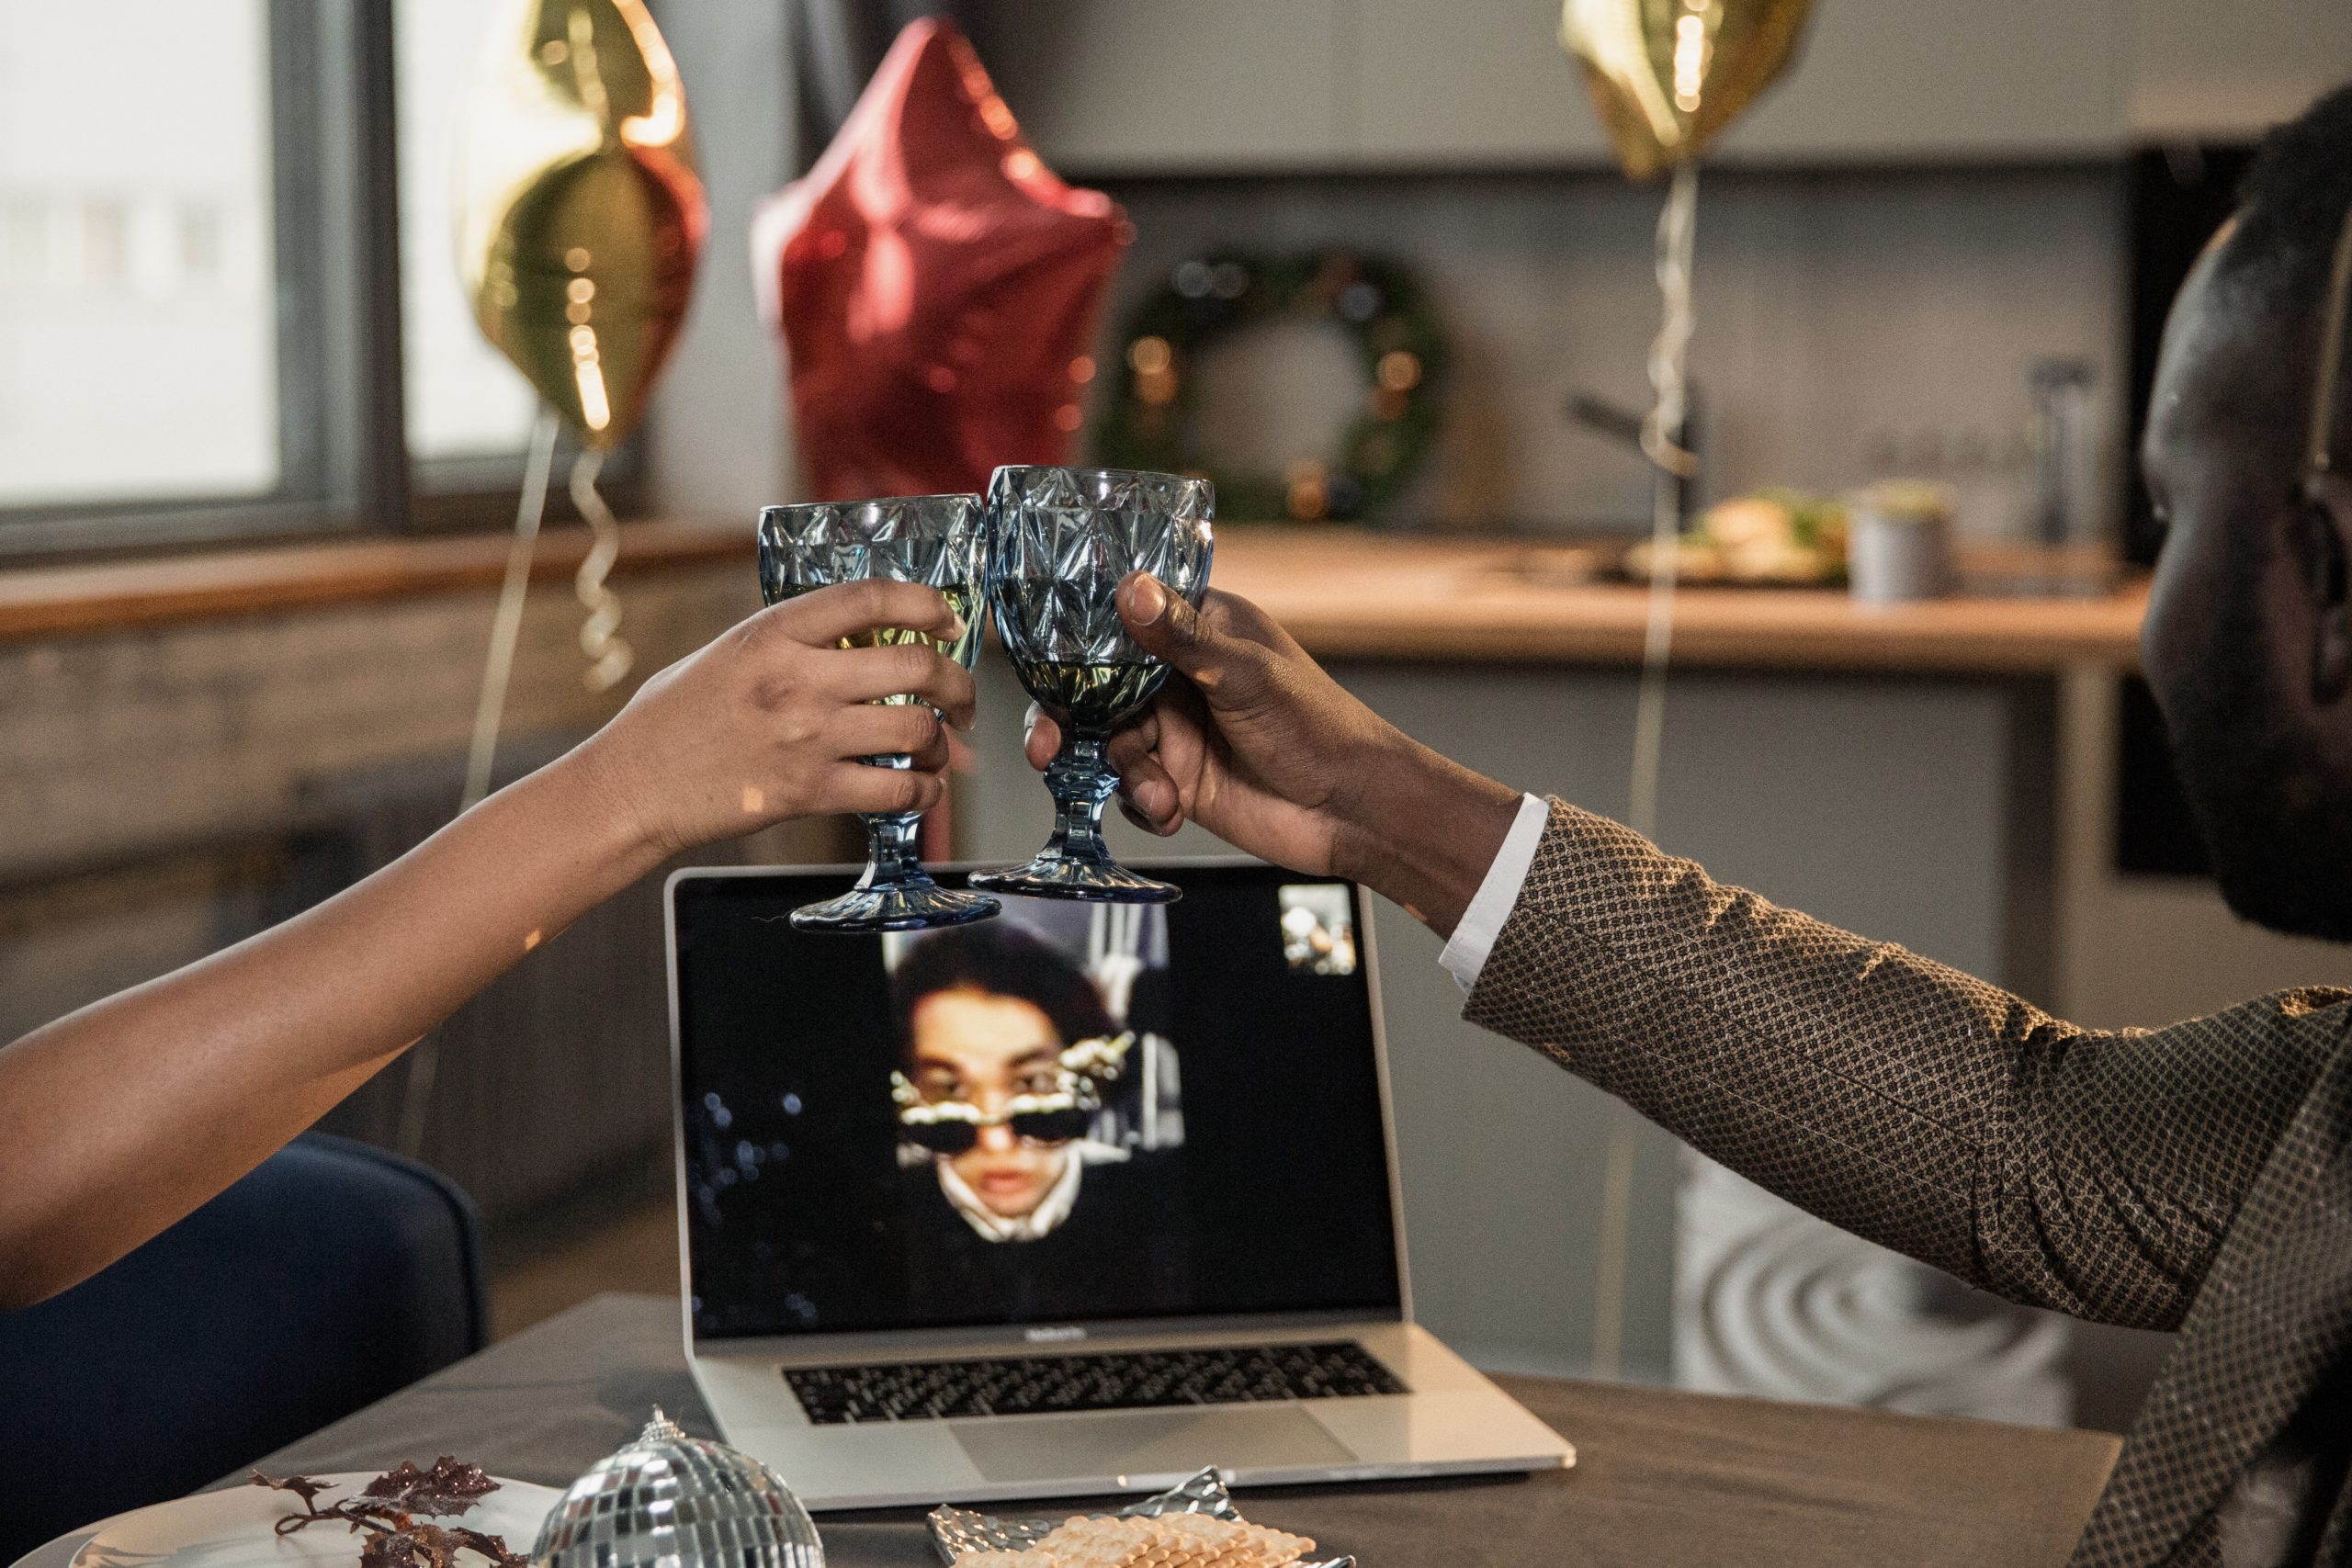 two people making a toast in front of a laptop while in a video conference with another woman